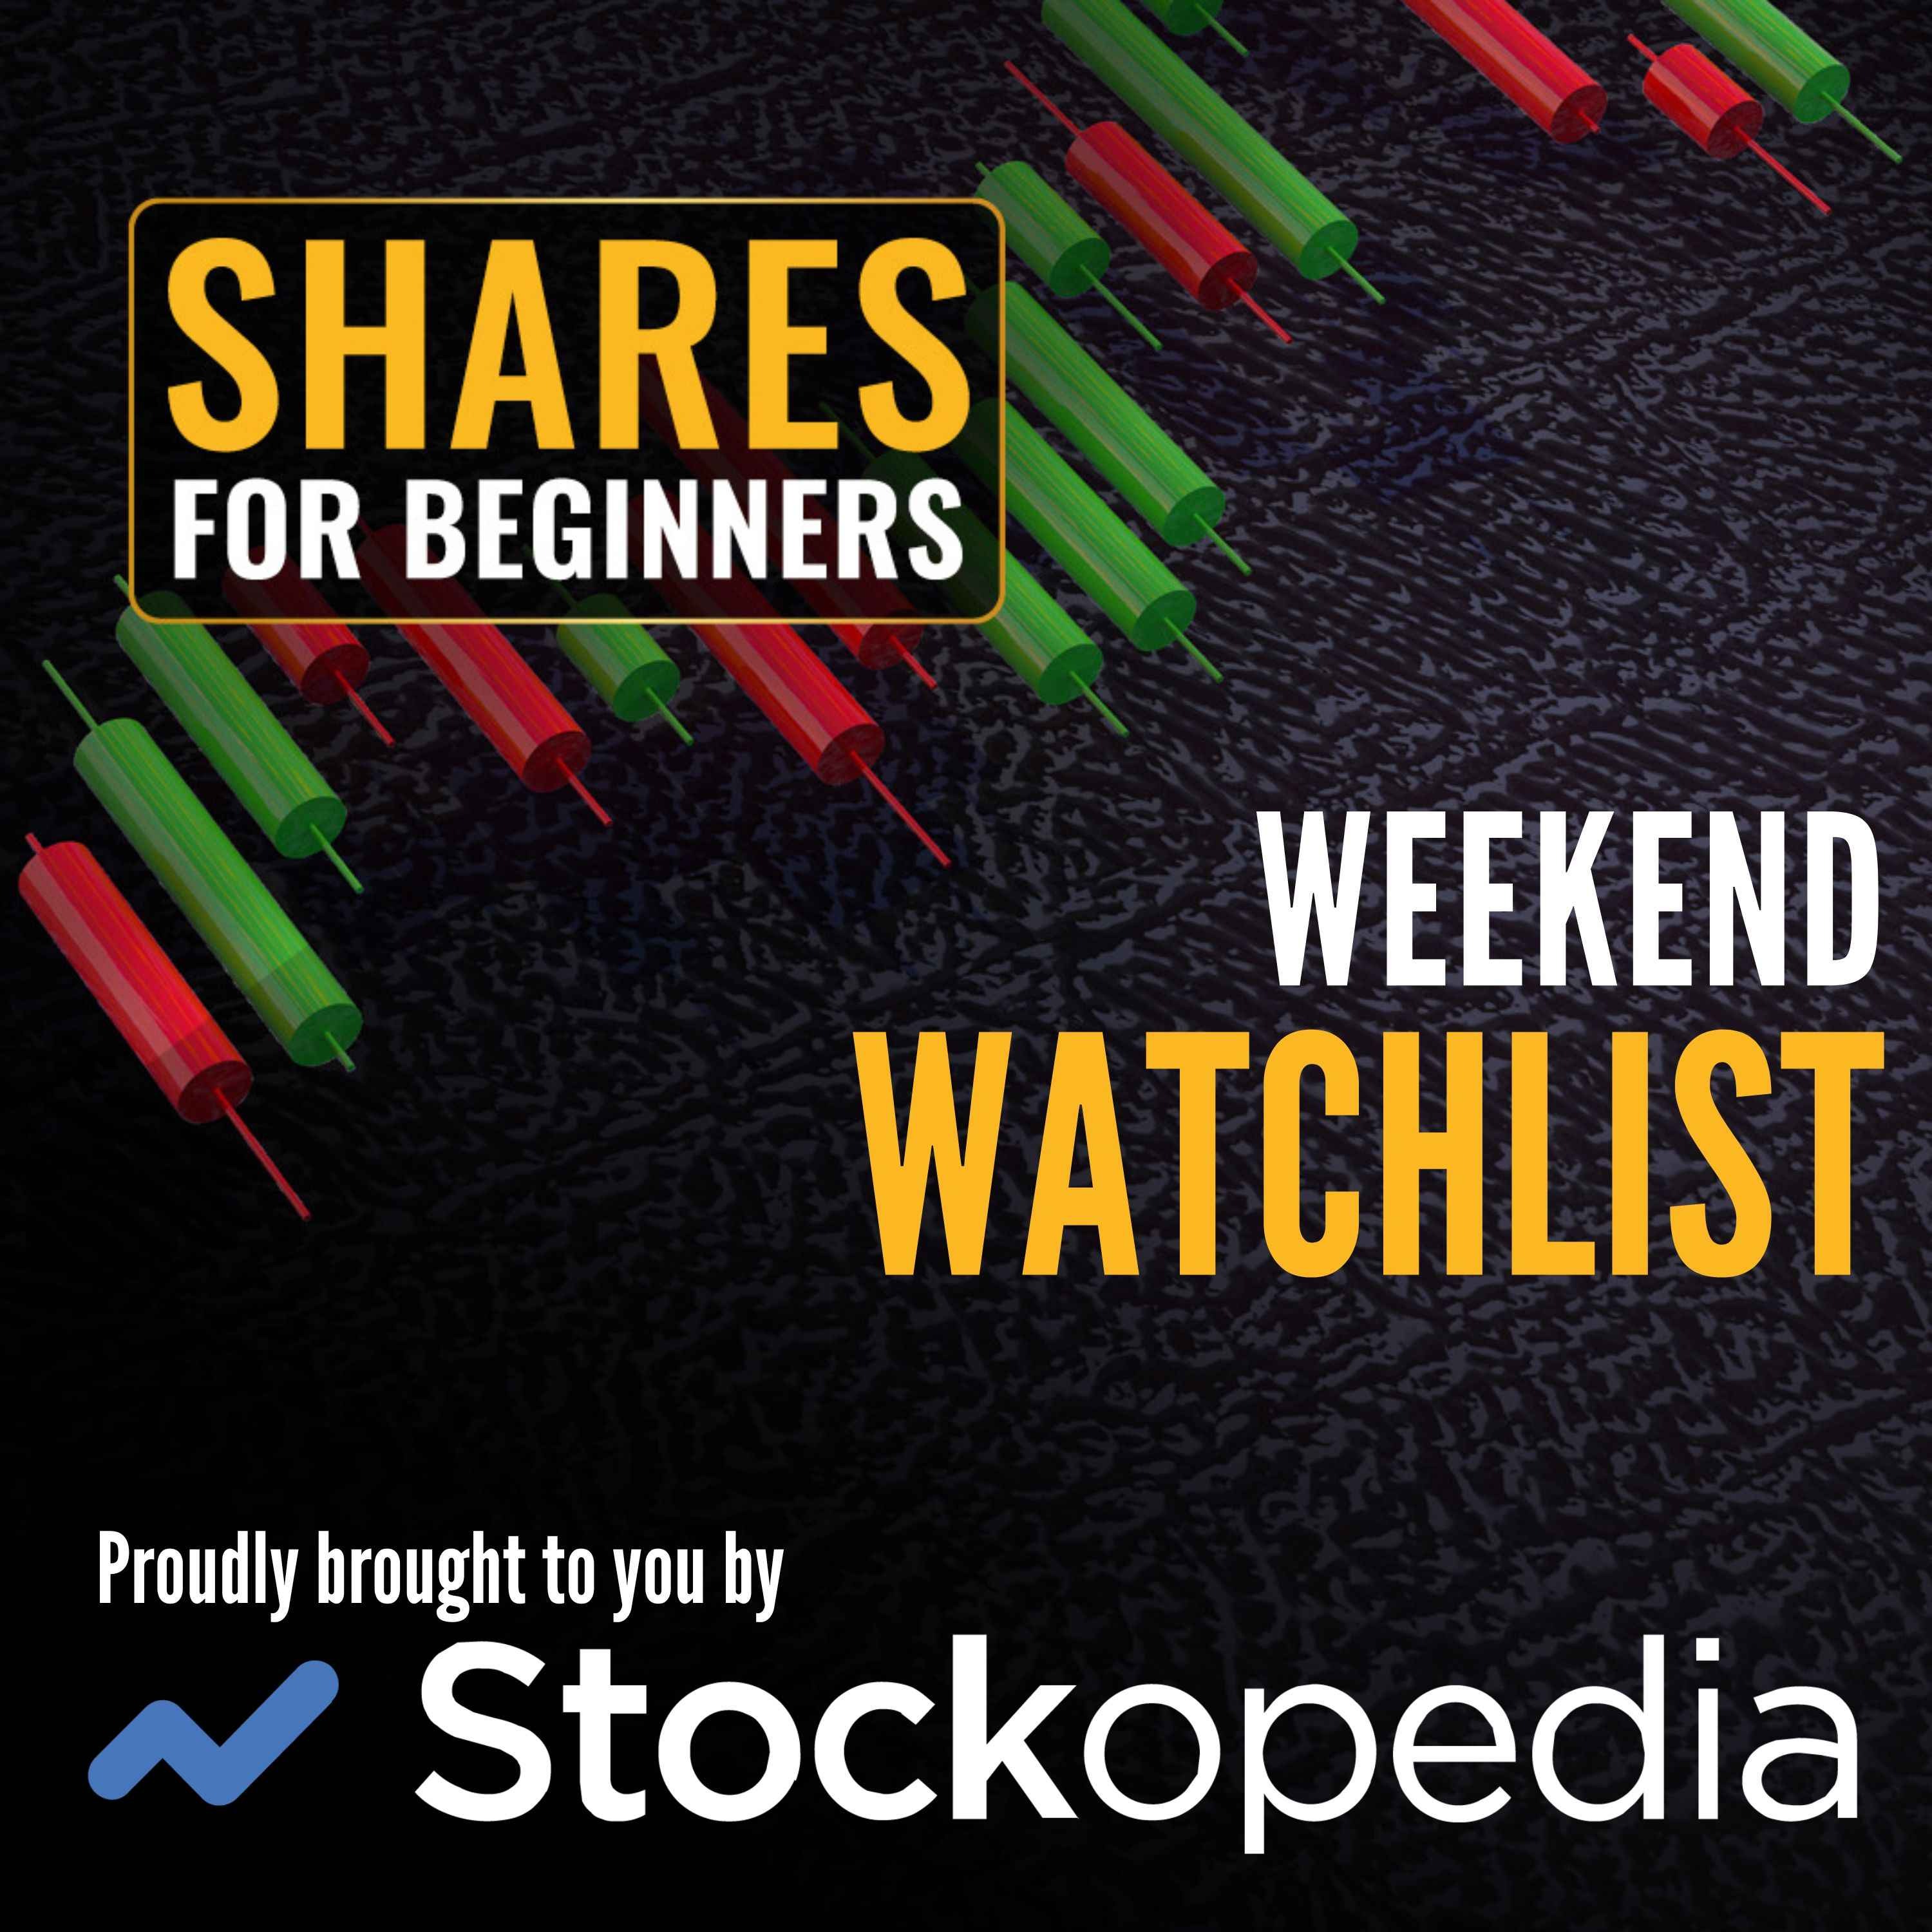 Weekend Watchlist - Seven Group Holdings Limited ASX:SVW